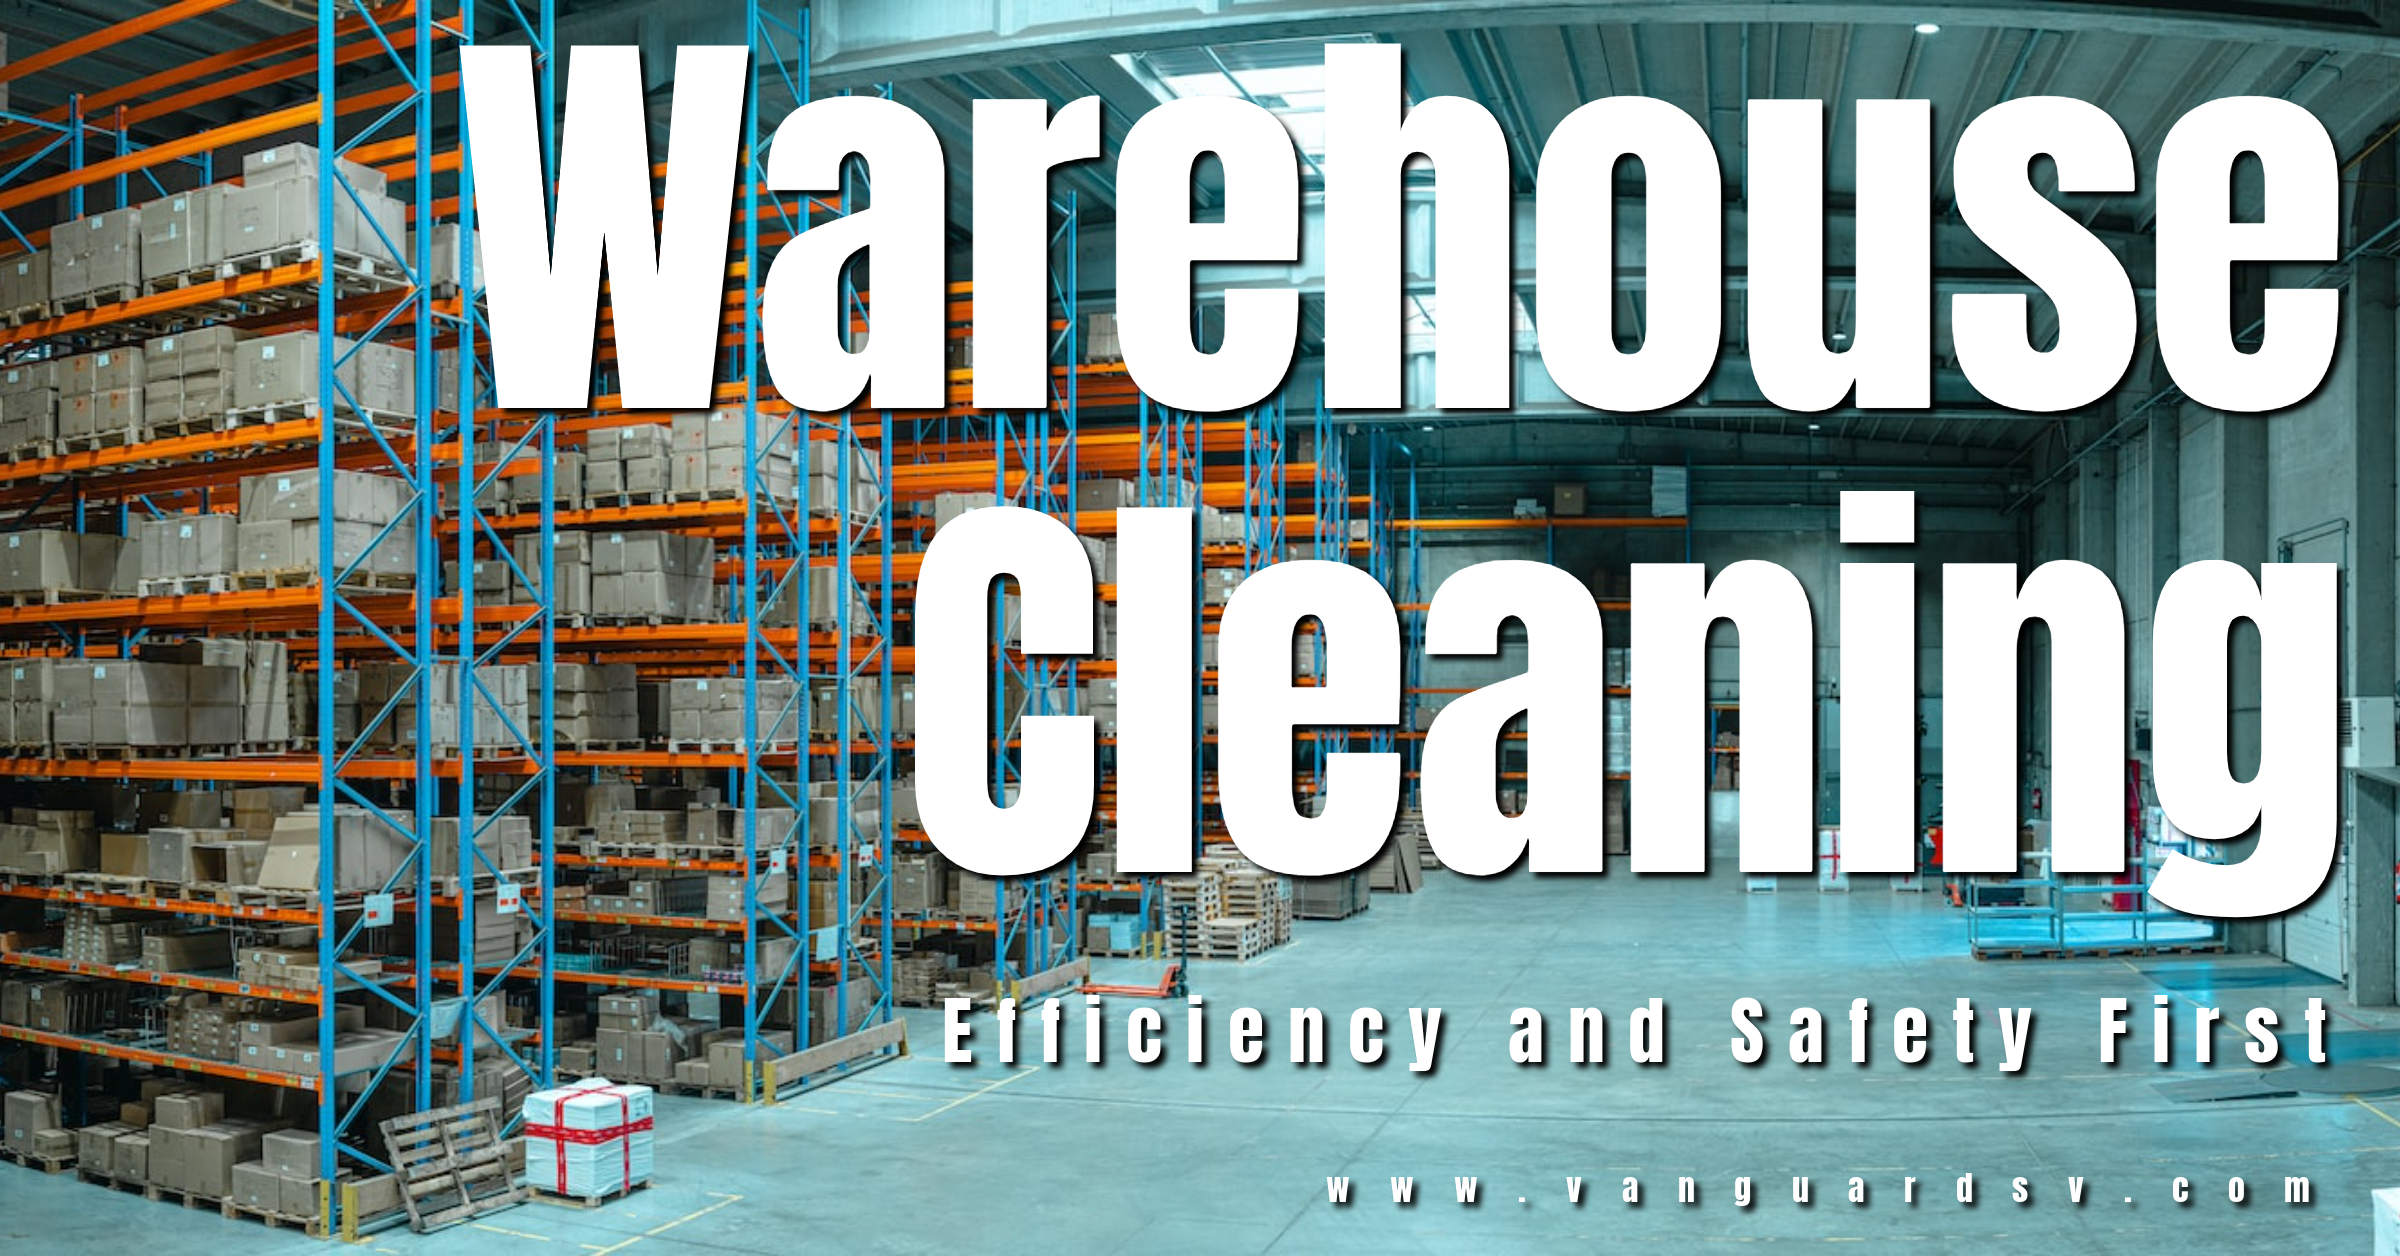 Warehouse-Cleaning-Efficiency-and-Safety-First